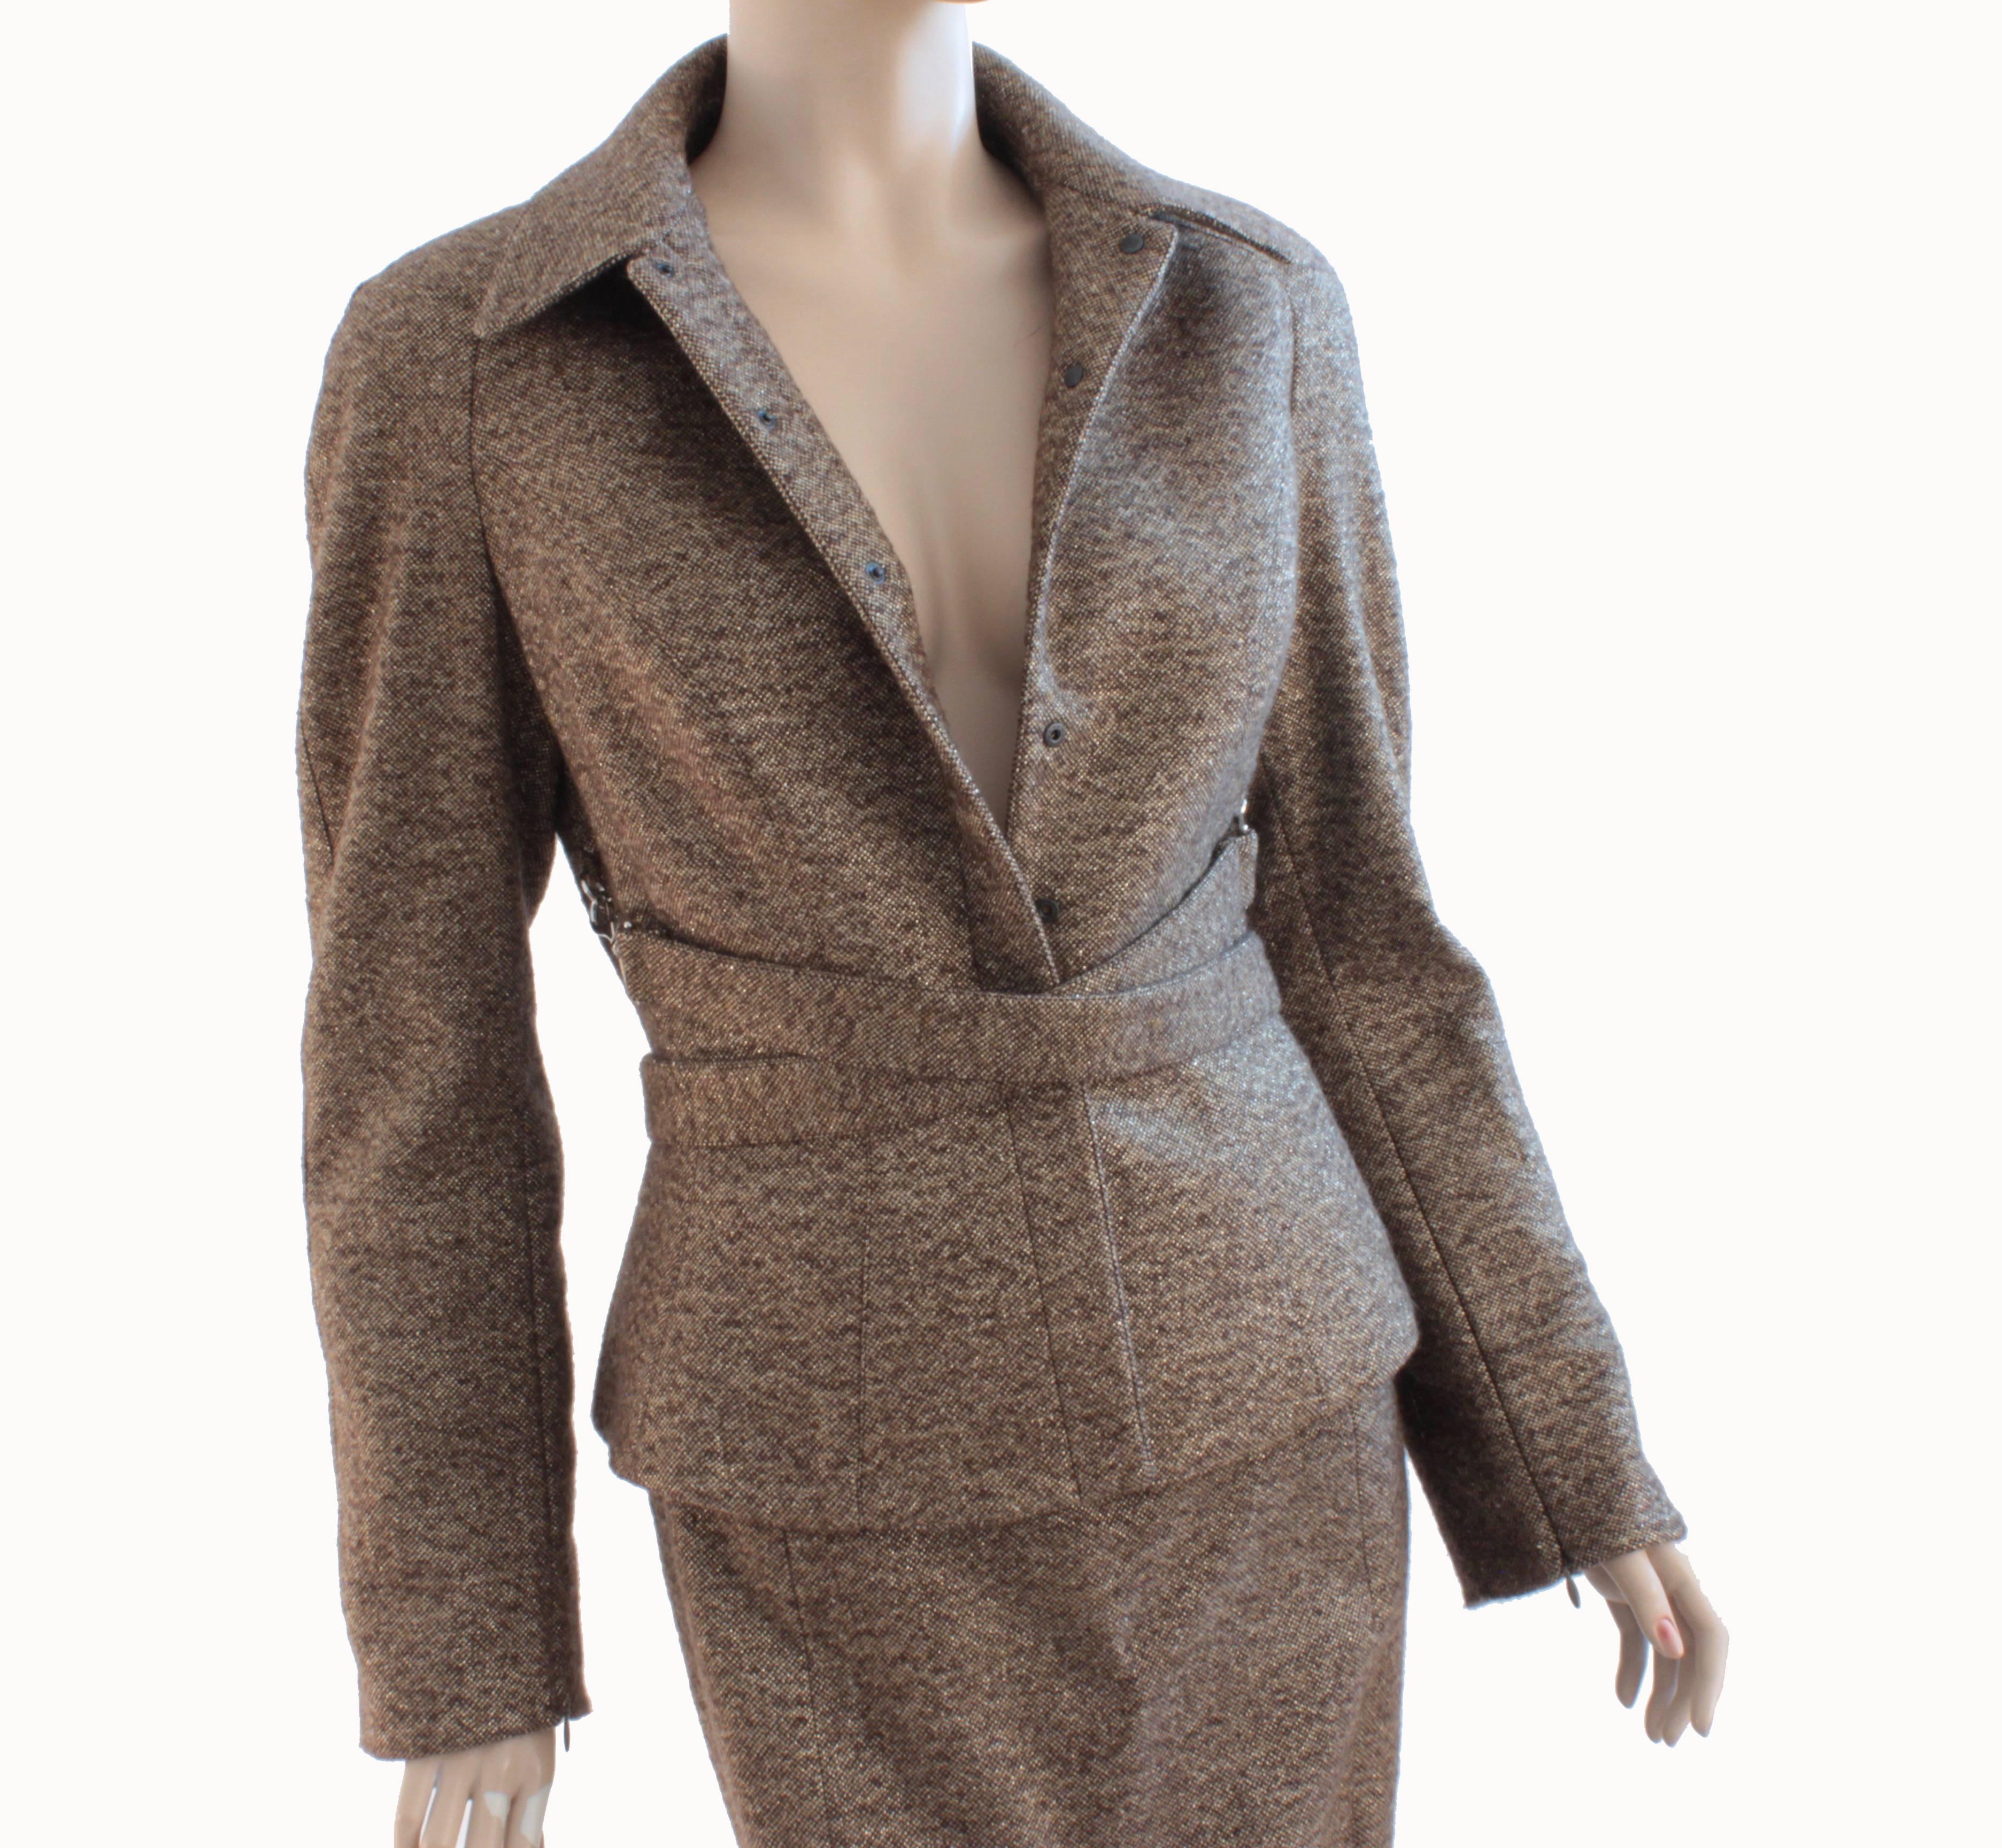 This jacket and skirt suit is from Thierry Mugler, most likely made in 2011, after the house was renamed MUGLER.  Made from a cream and tan tweed wool, it features flecks of gold lurex thread throughout.  The jacket has small dog leash clasps at